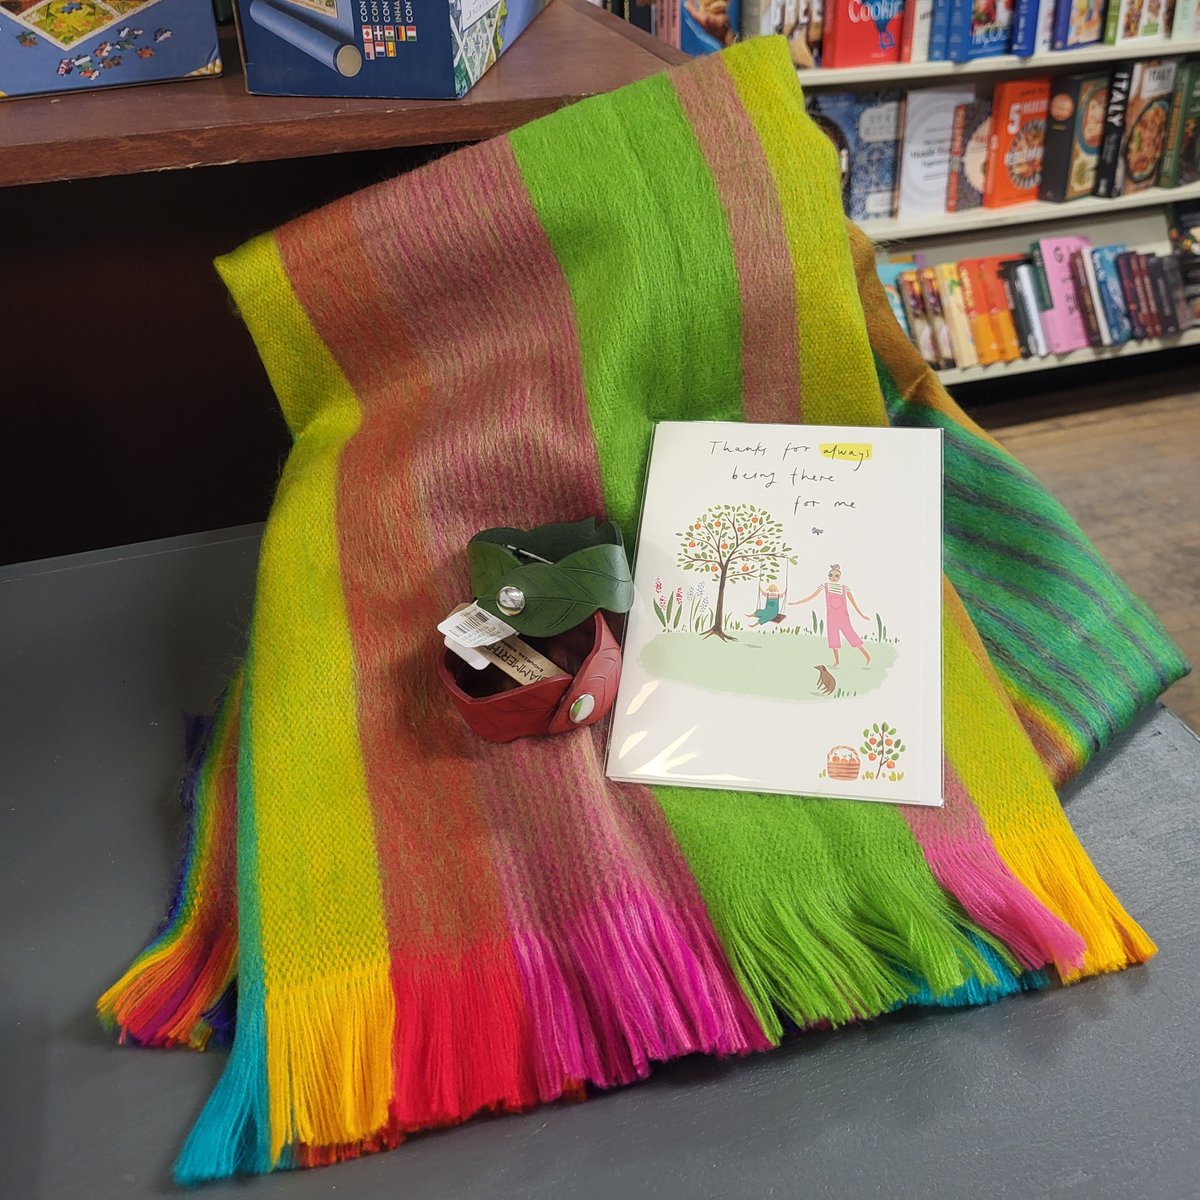 More #CanadianCompany #MotherDays ideas!

#NBMade Hammerthreads leaf cuff brackets & Pokoloko throw.

Visit us in person or online at tidewaterbooks.ca! 💕🇨🇦📚

#ShopSmall #ShopLocal #ShopNB #ShopIndie #BookLovers #IndieBookstores #IReadLocal #SmallBusinessEveryDay